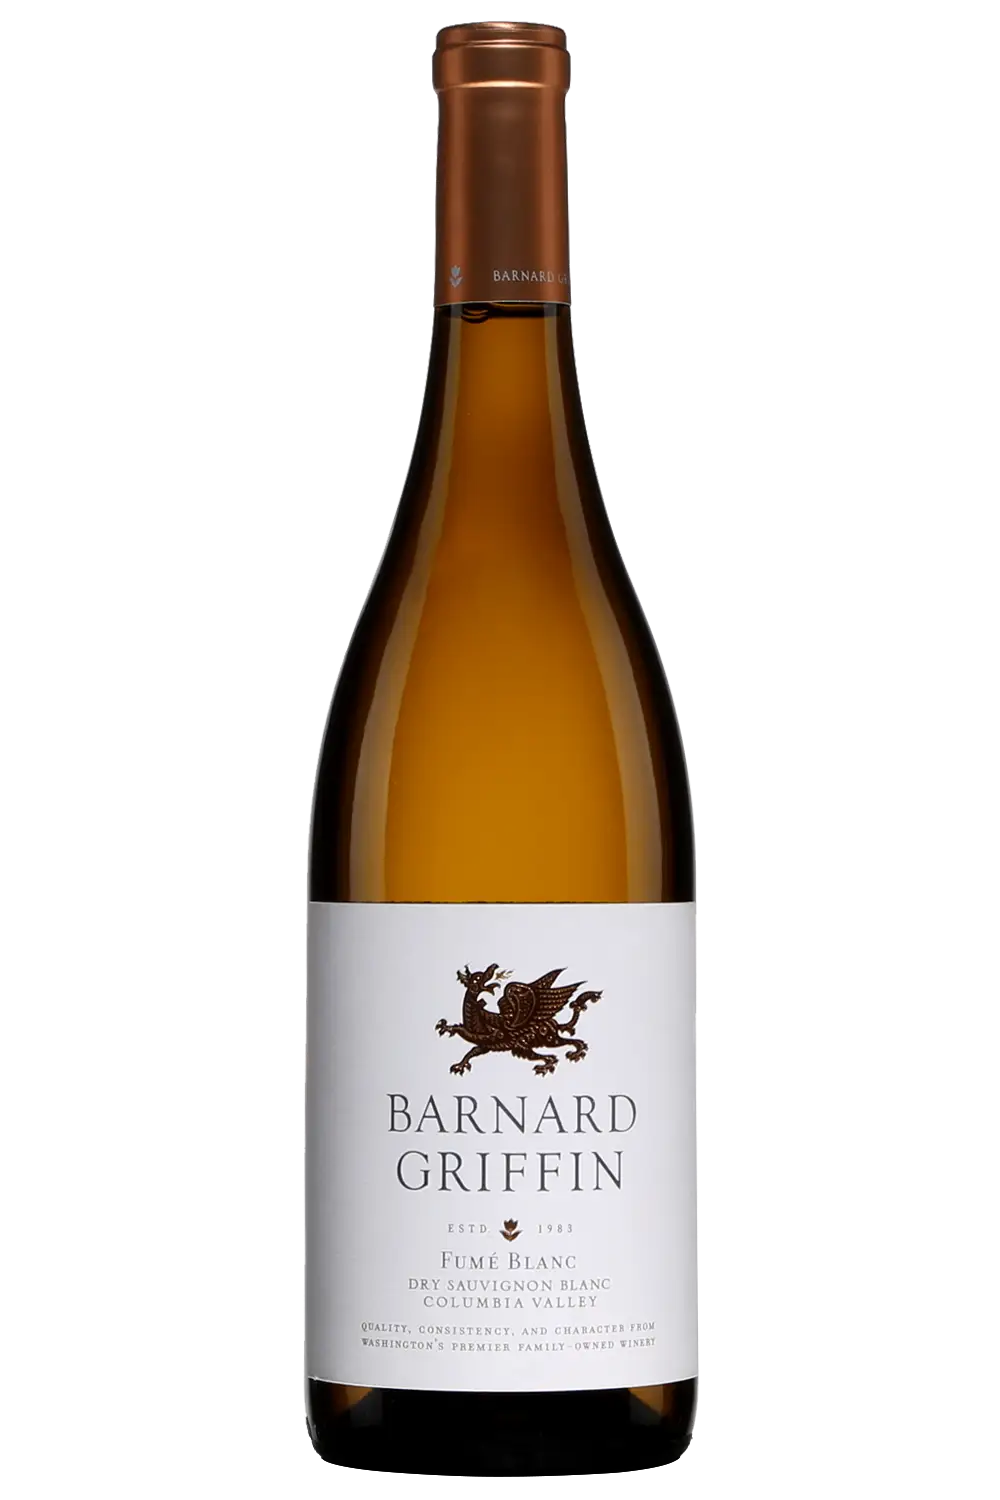 Bottle of Barnard Griffin Fumé Blanc from search results